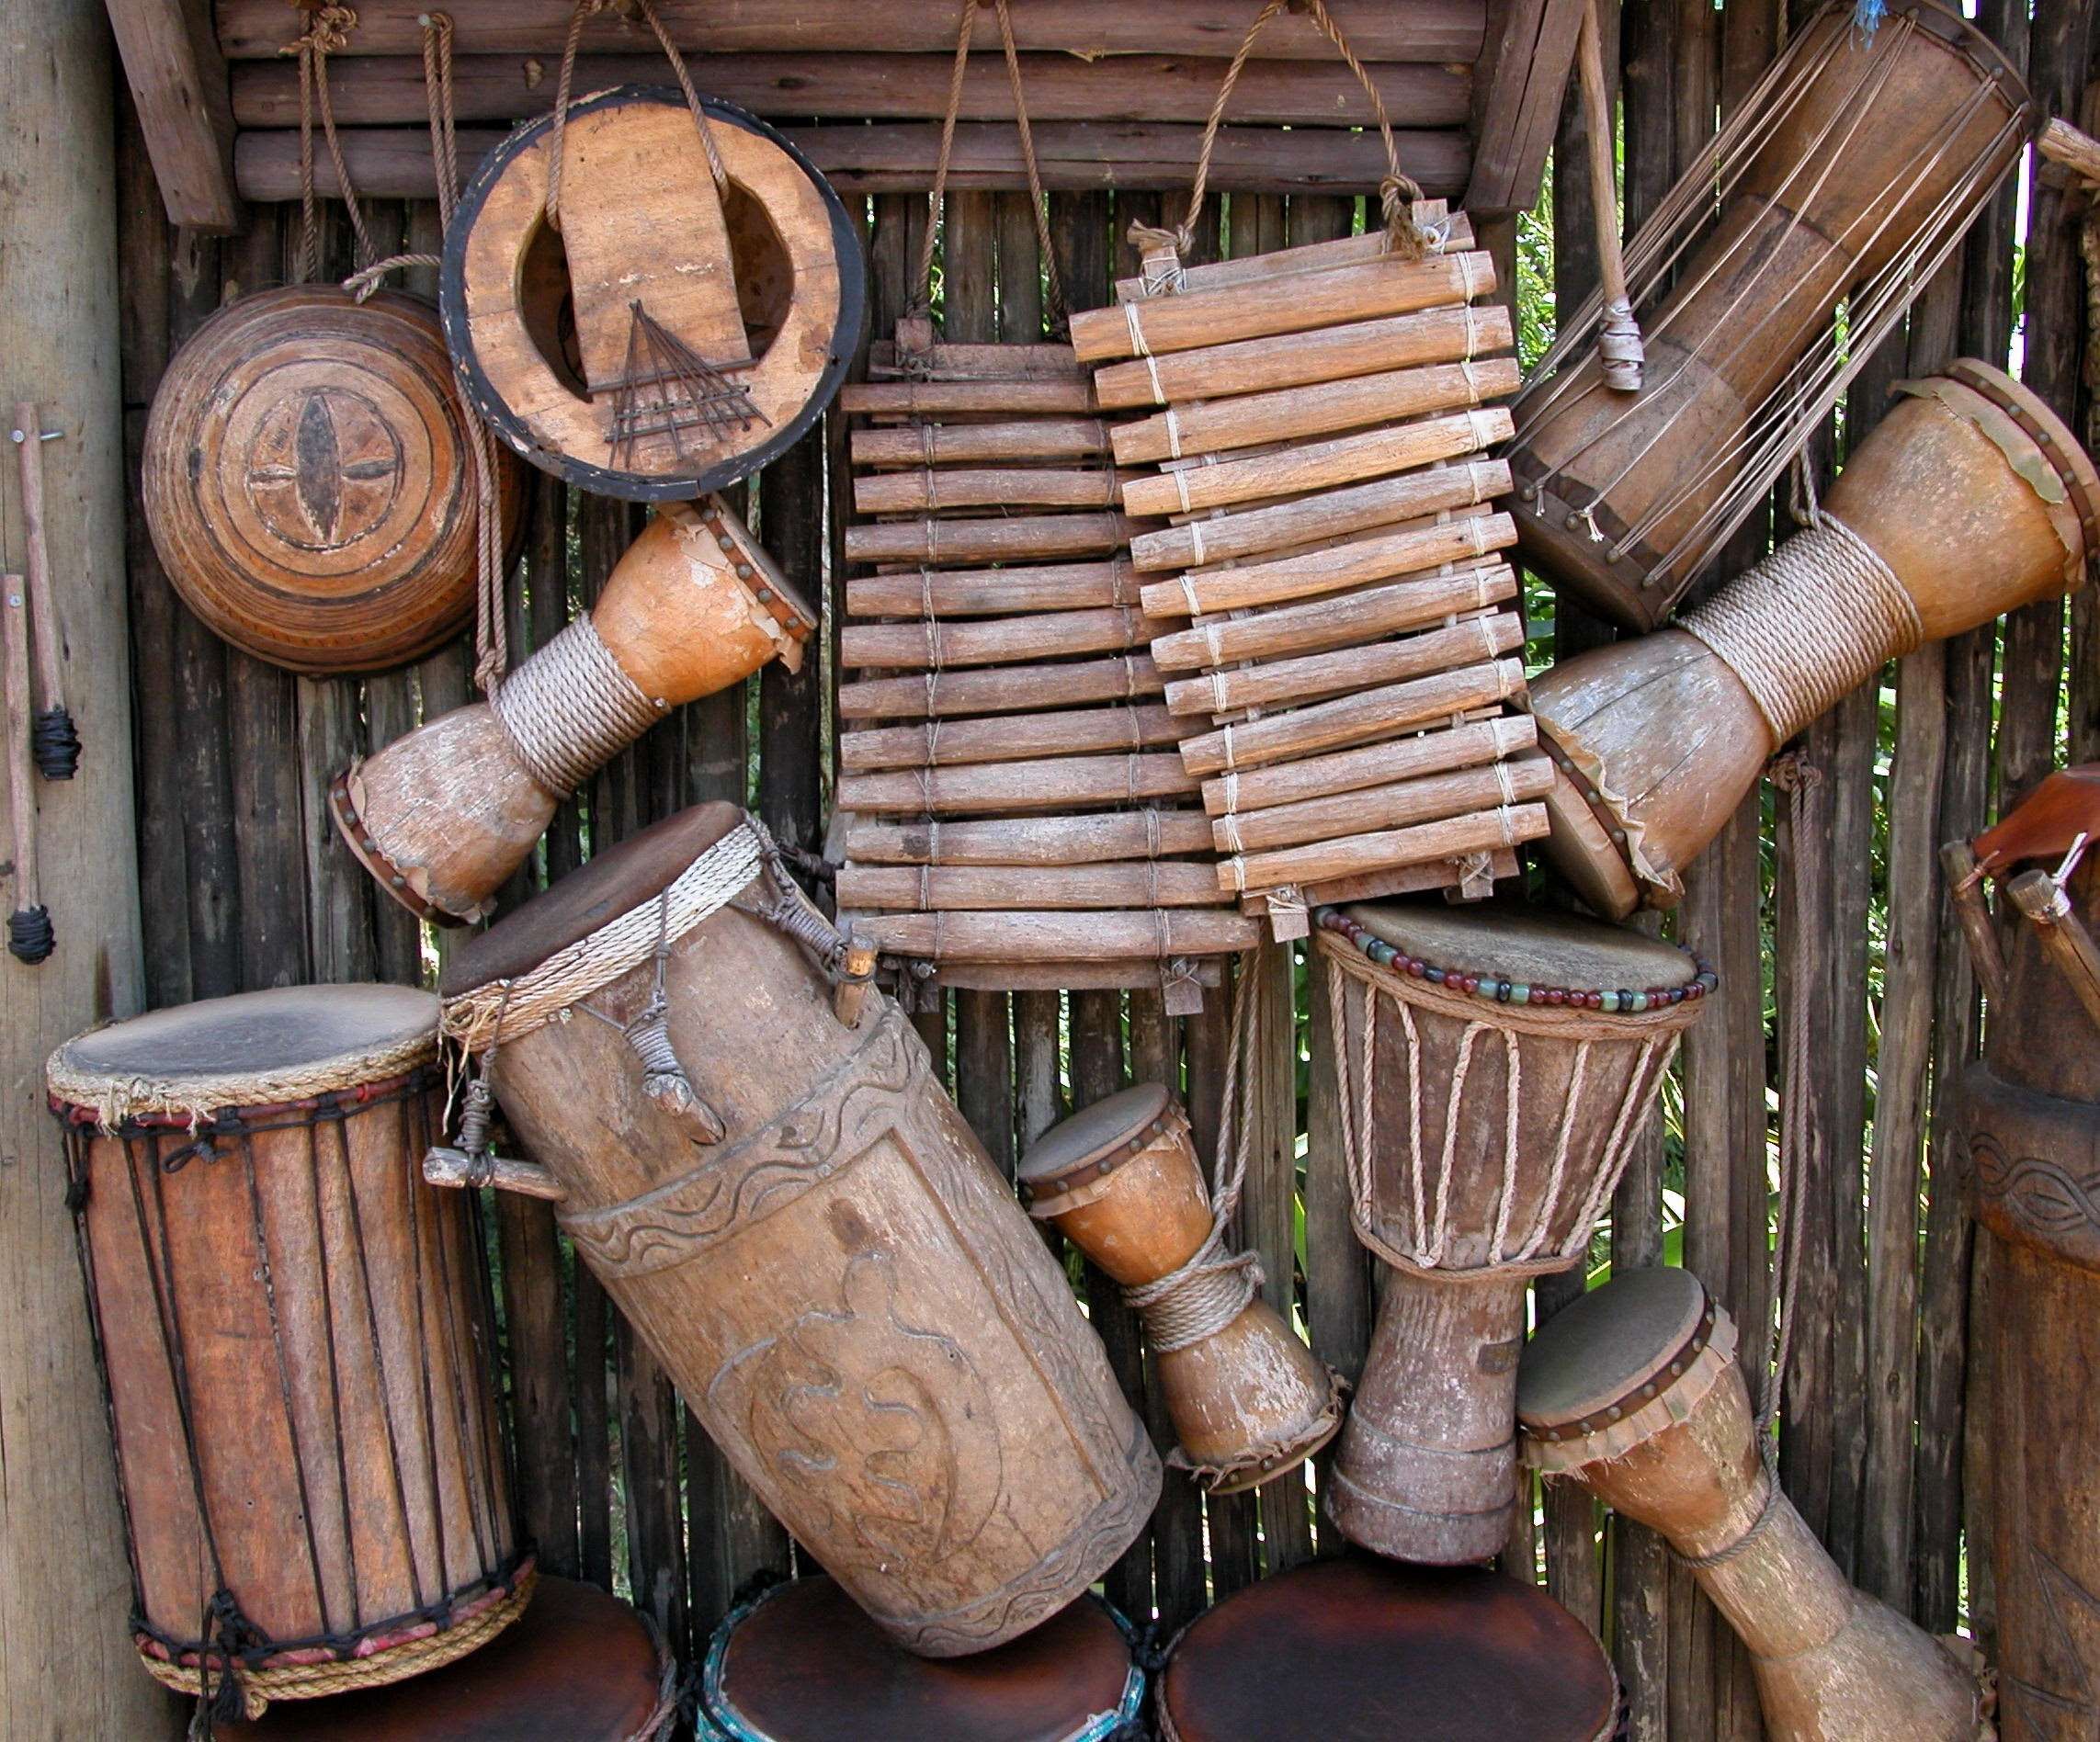 crafts, drums, handmade, musical instruments, percussion